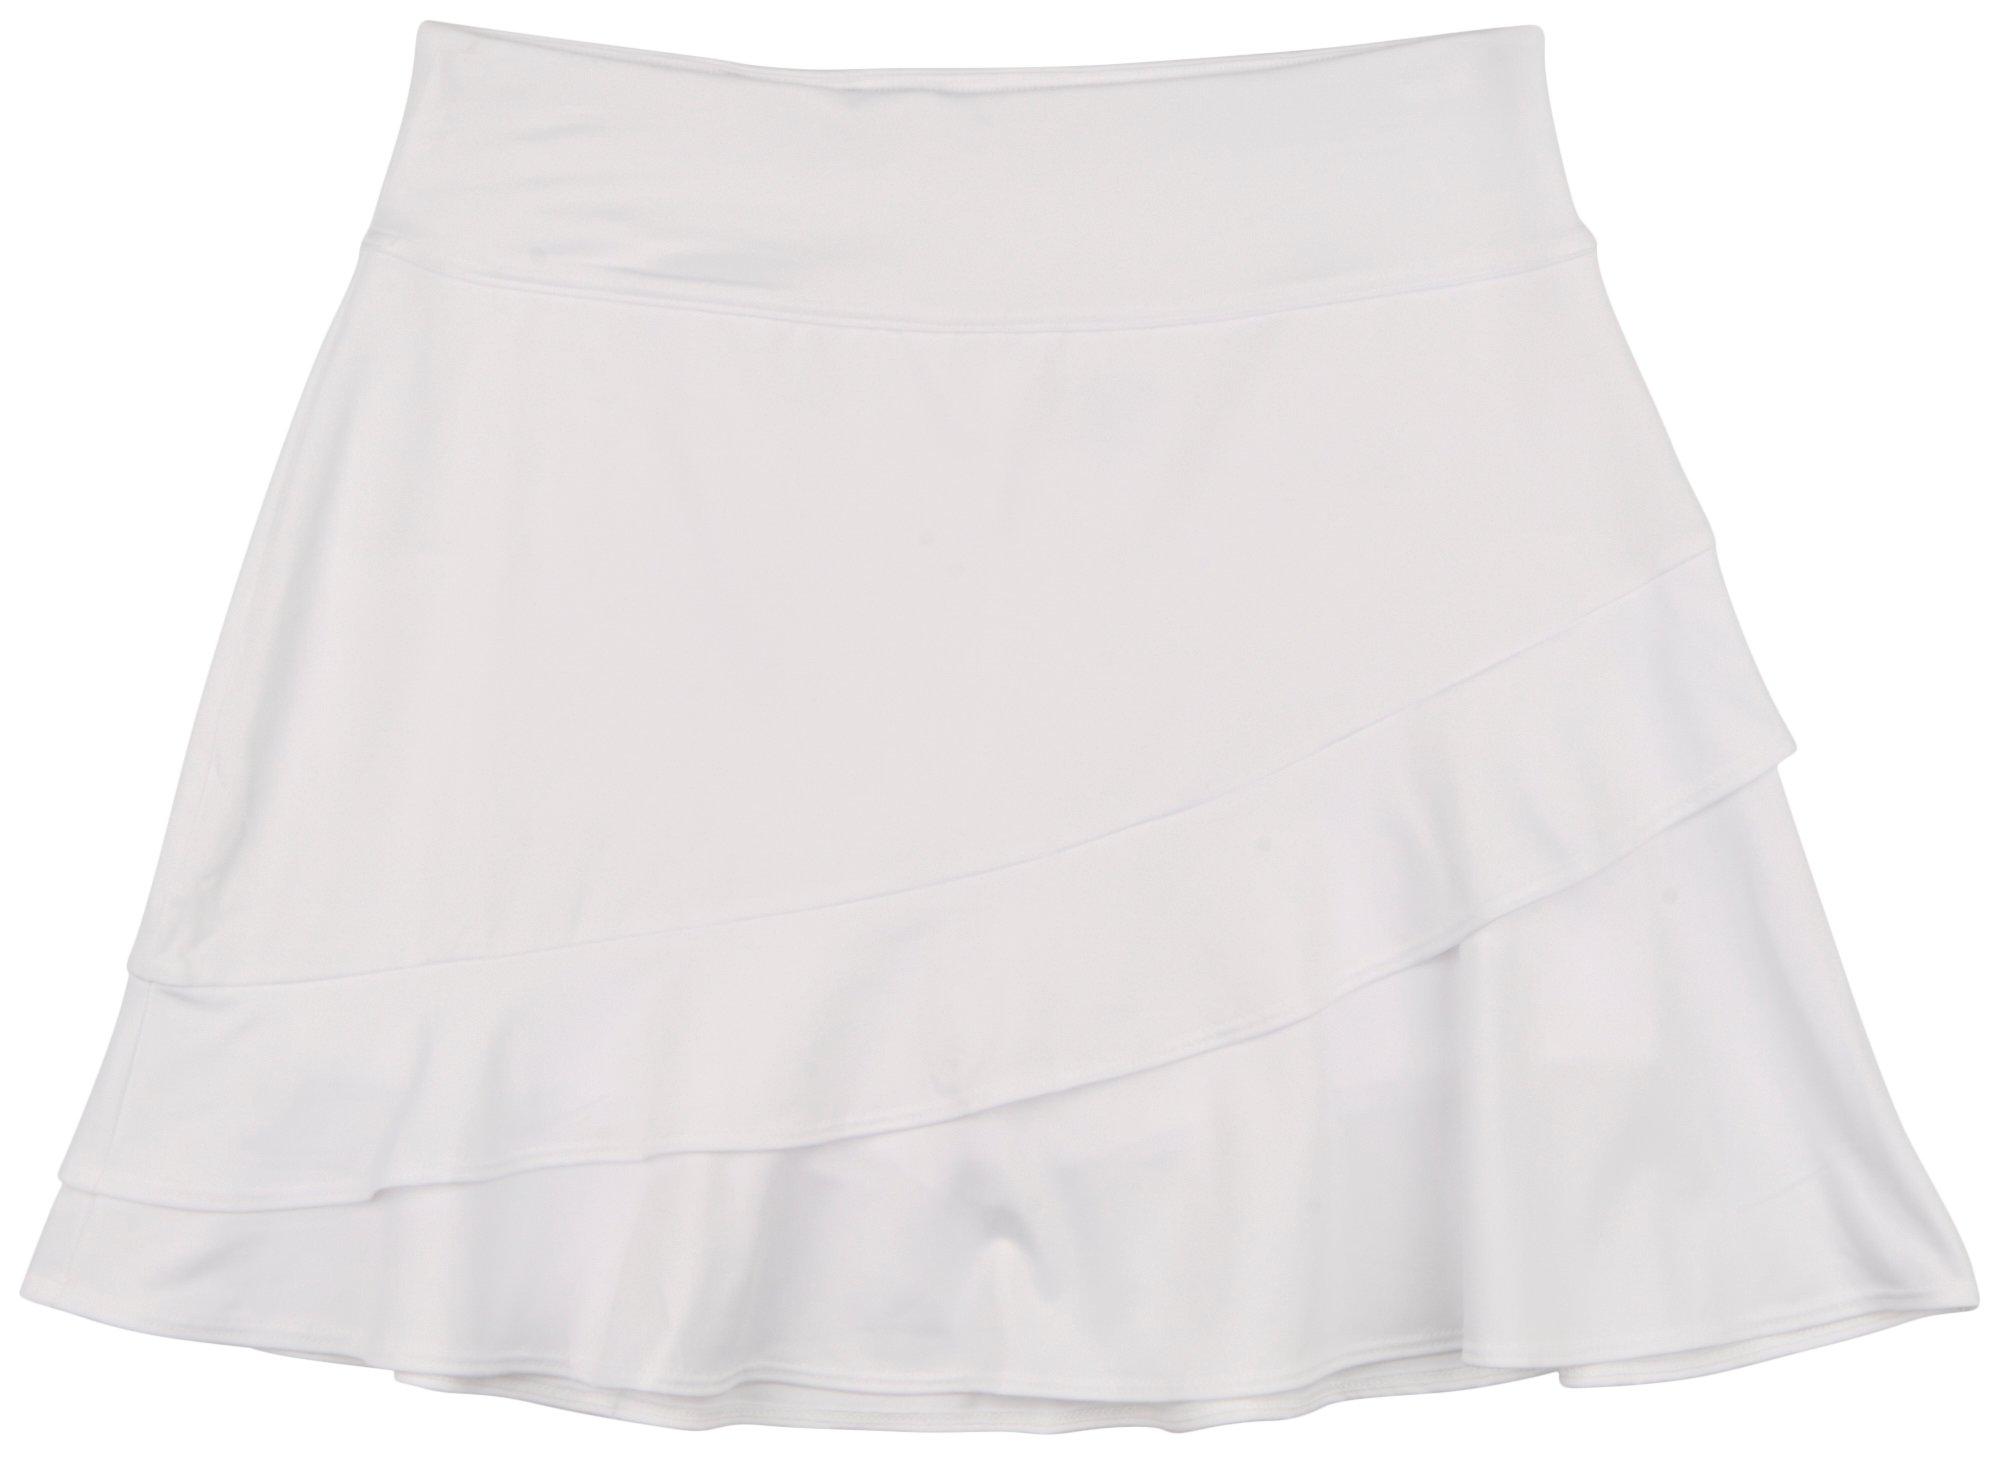 Coral Bay Golf Petite 18 in. Solid Layered Skort